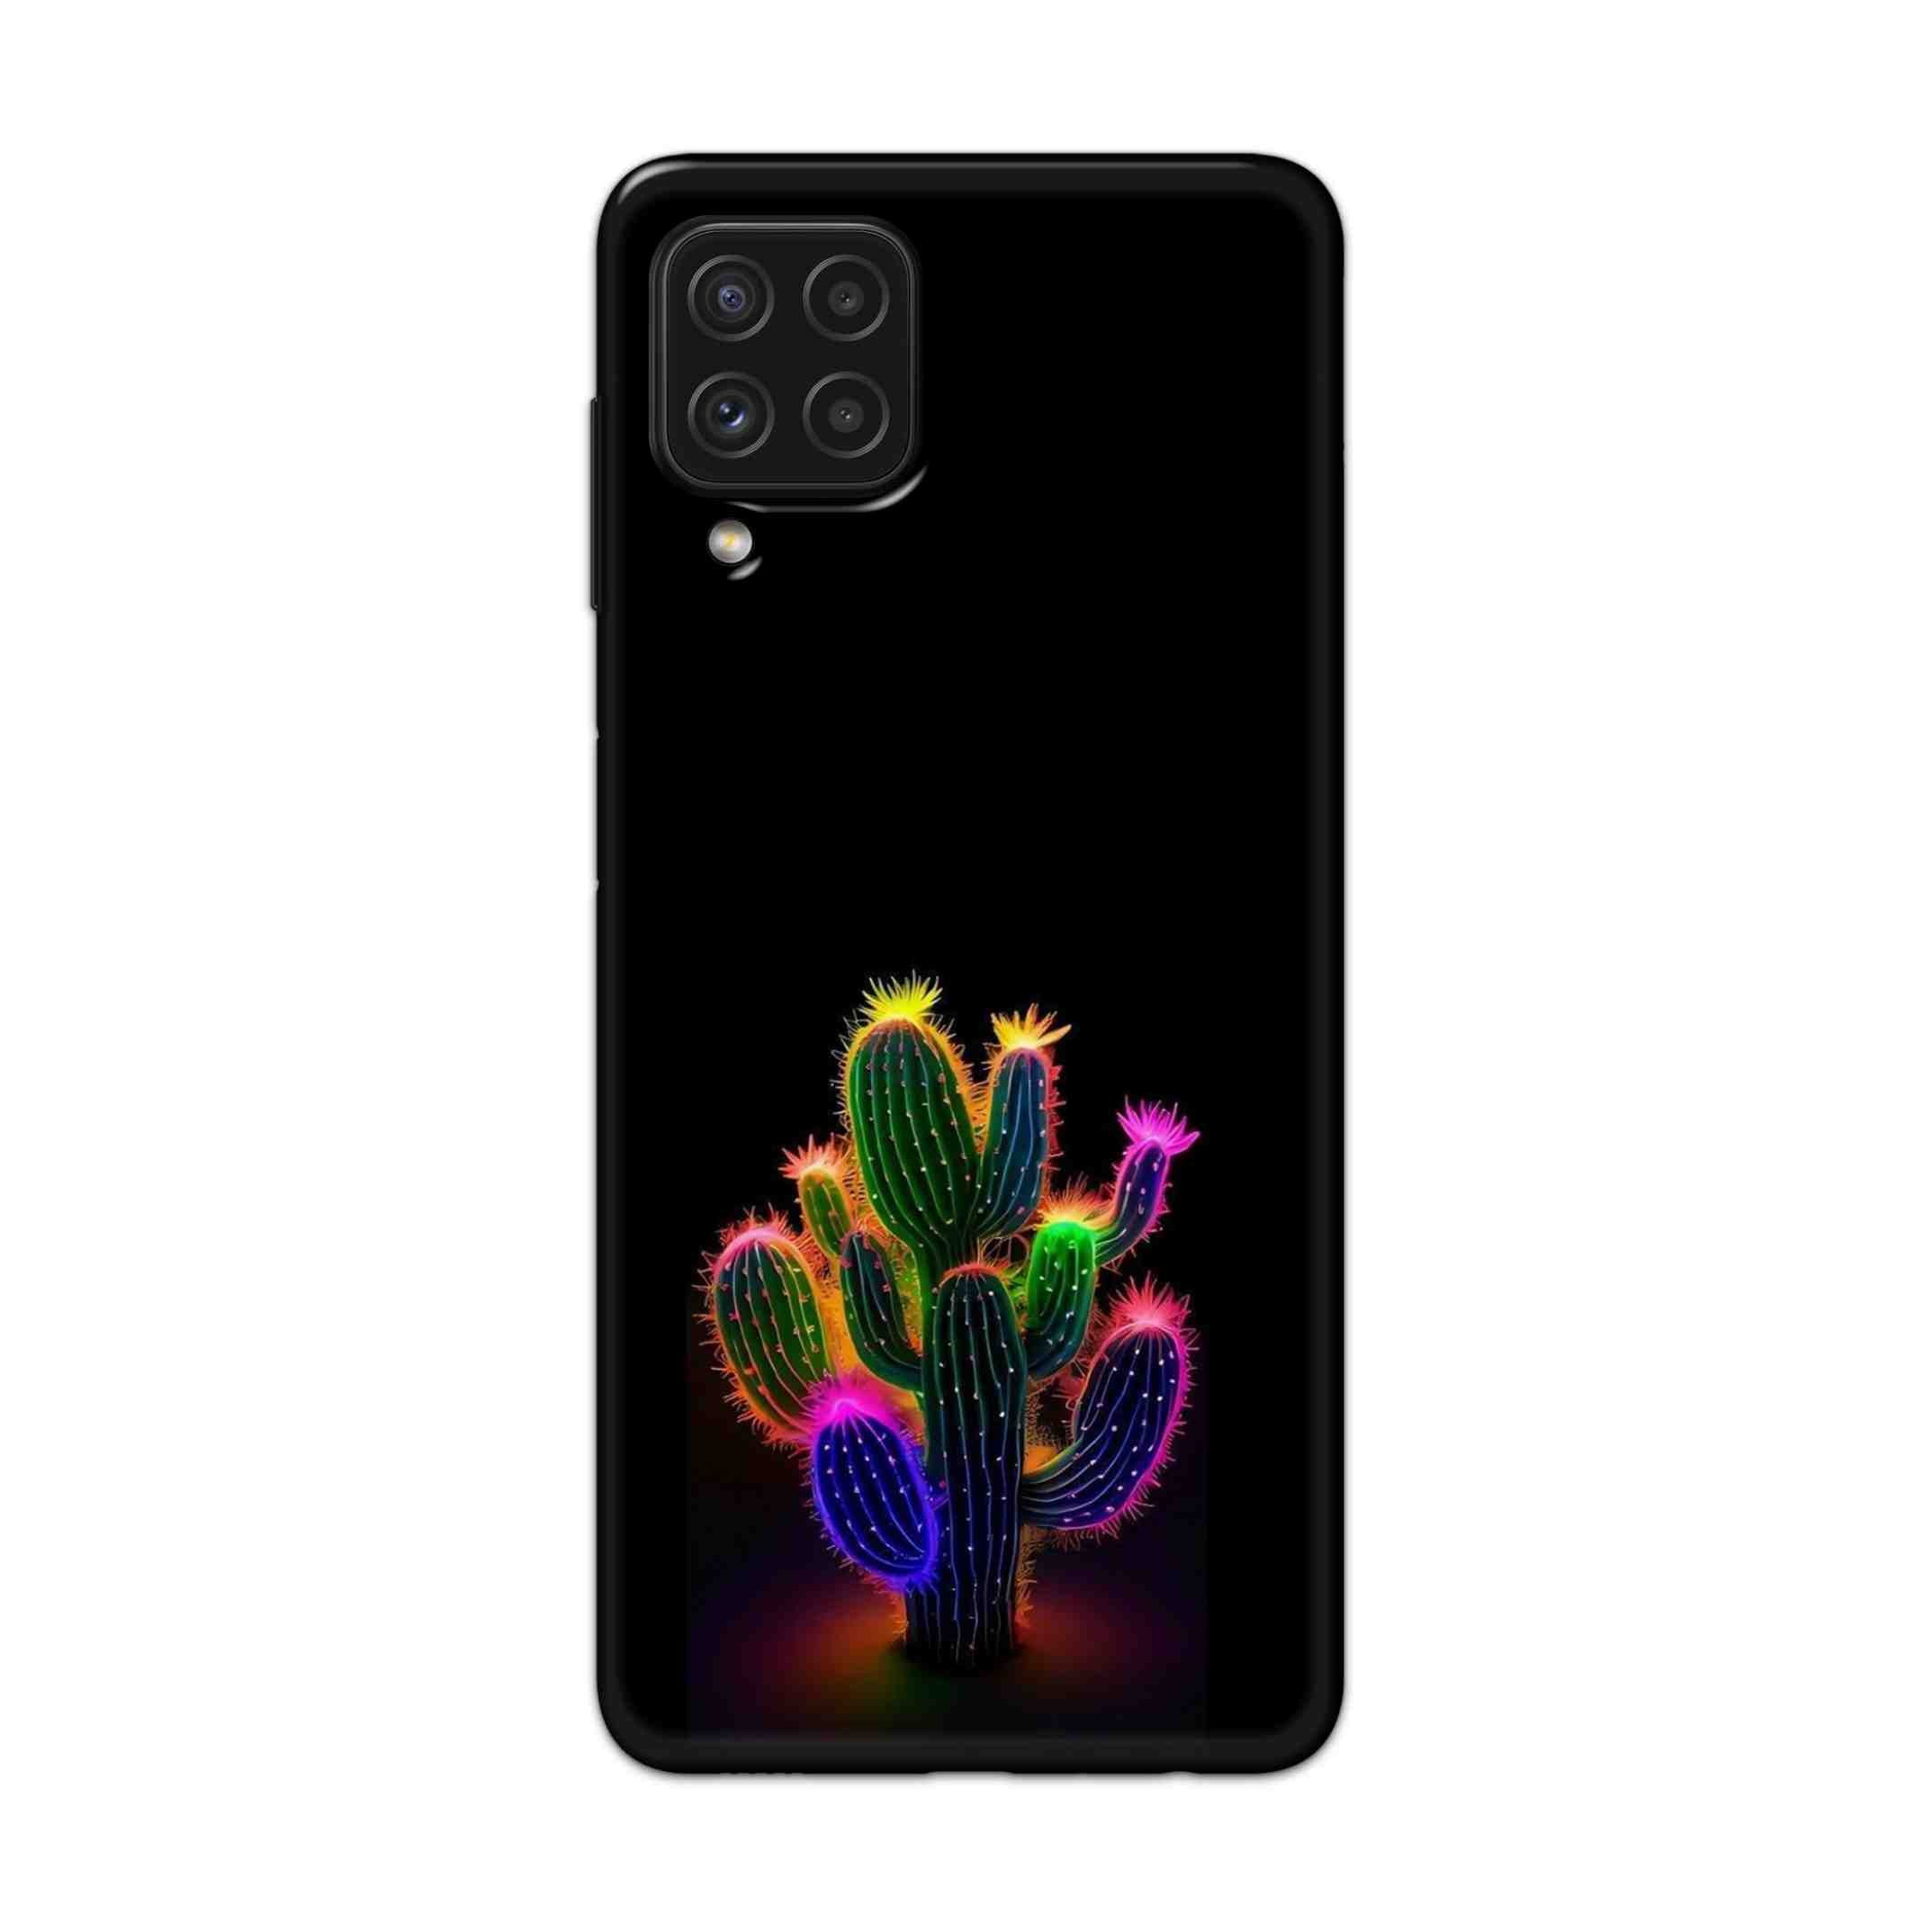 Buy Neon Flower Hard Back Mobile Phone Case Cover For Samsung Galaxy A22 Online